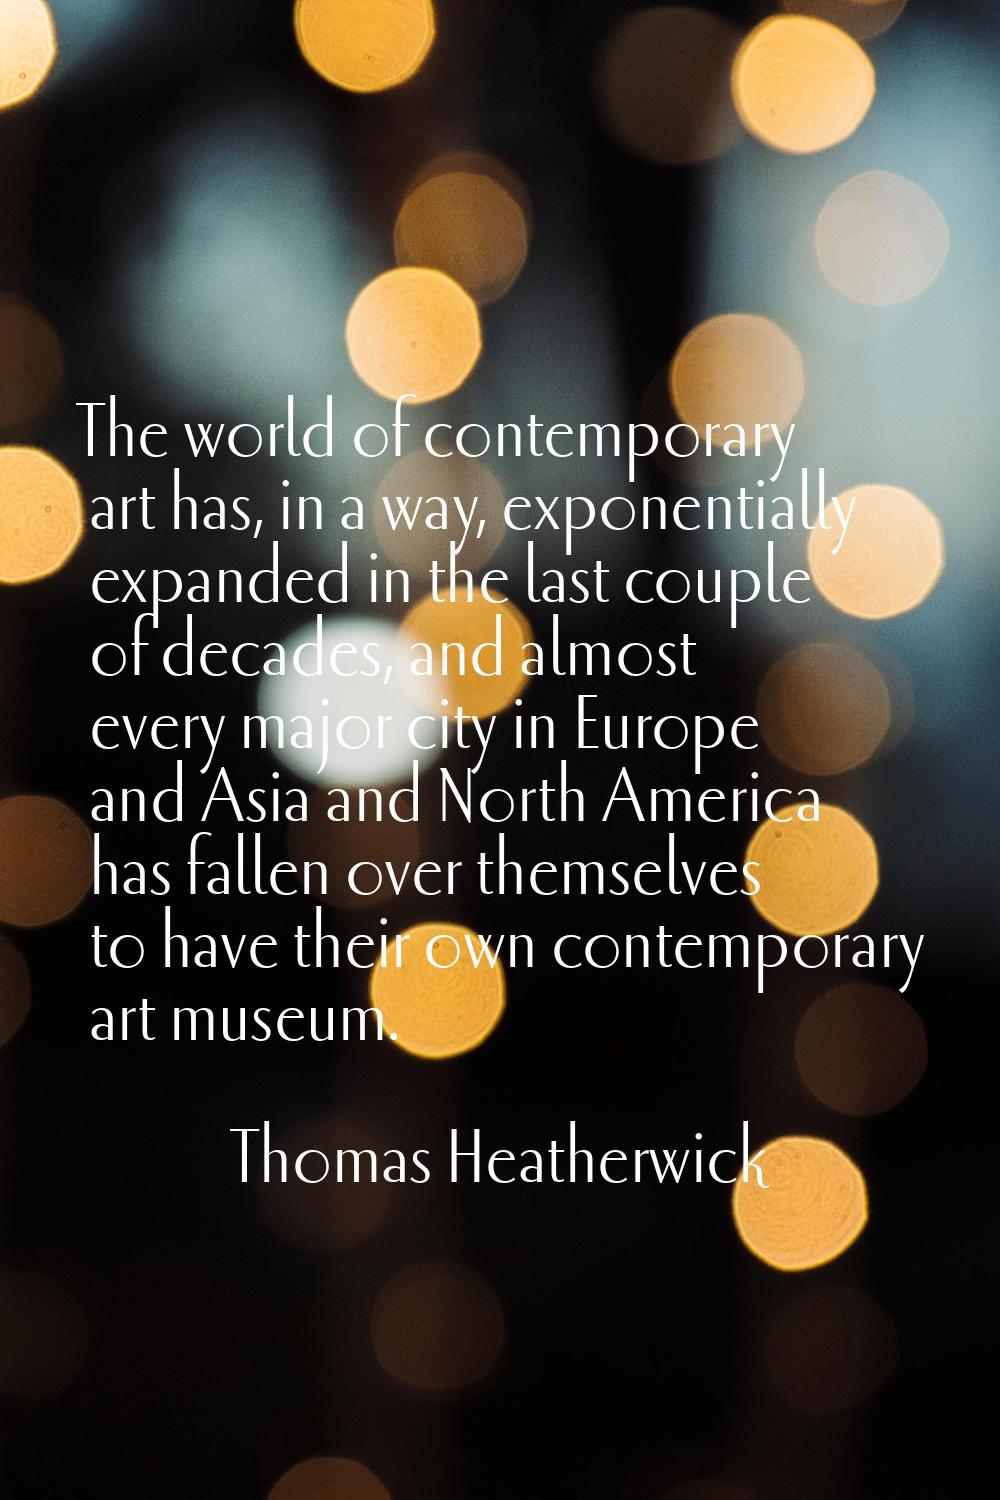 The world of contemporary art has, in a way, exponentially expanded in the last couple of decades, 